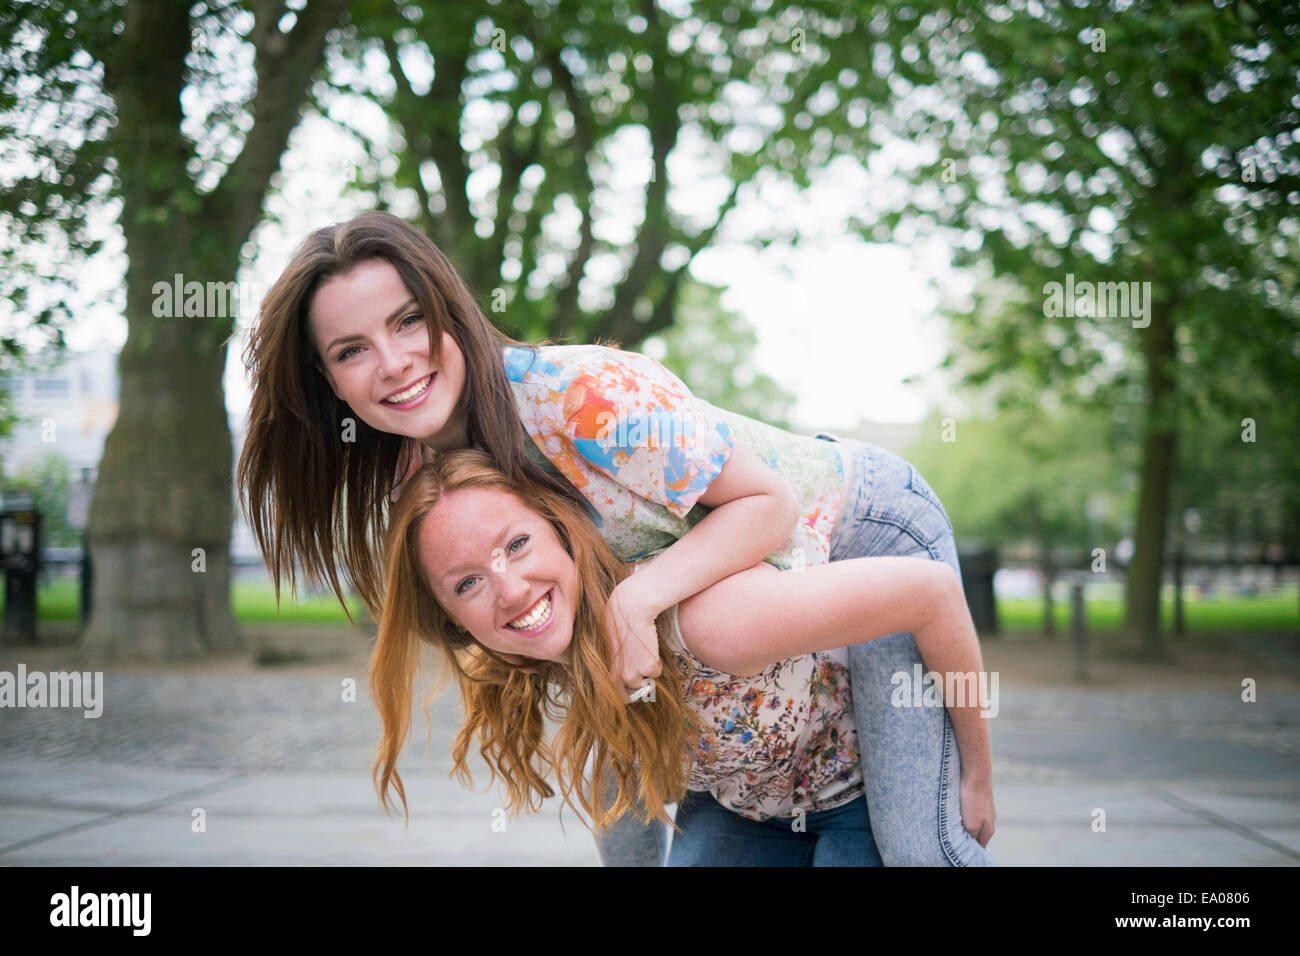 Portrait of two young female best friends giving piggy back in park Stock Photo